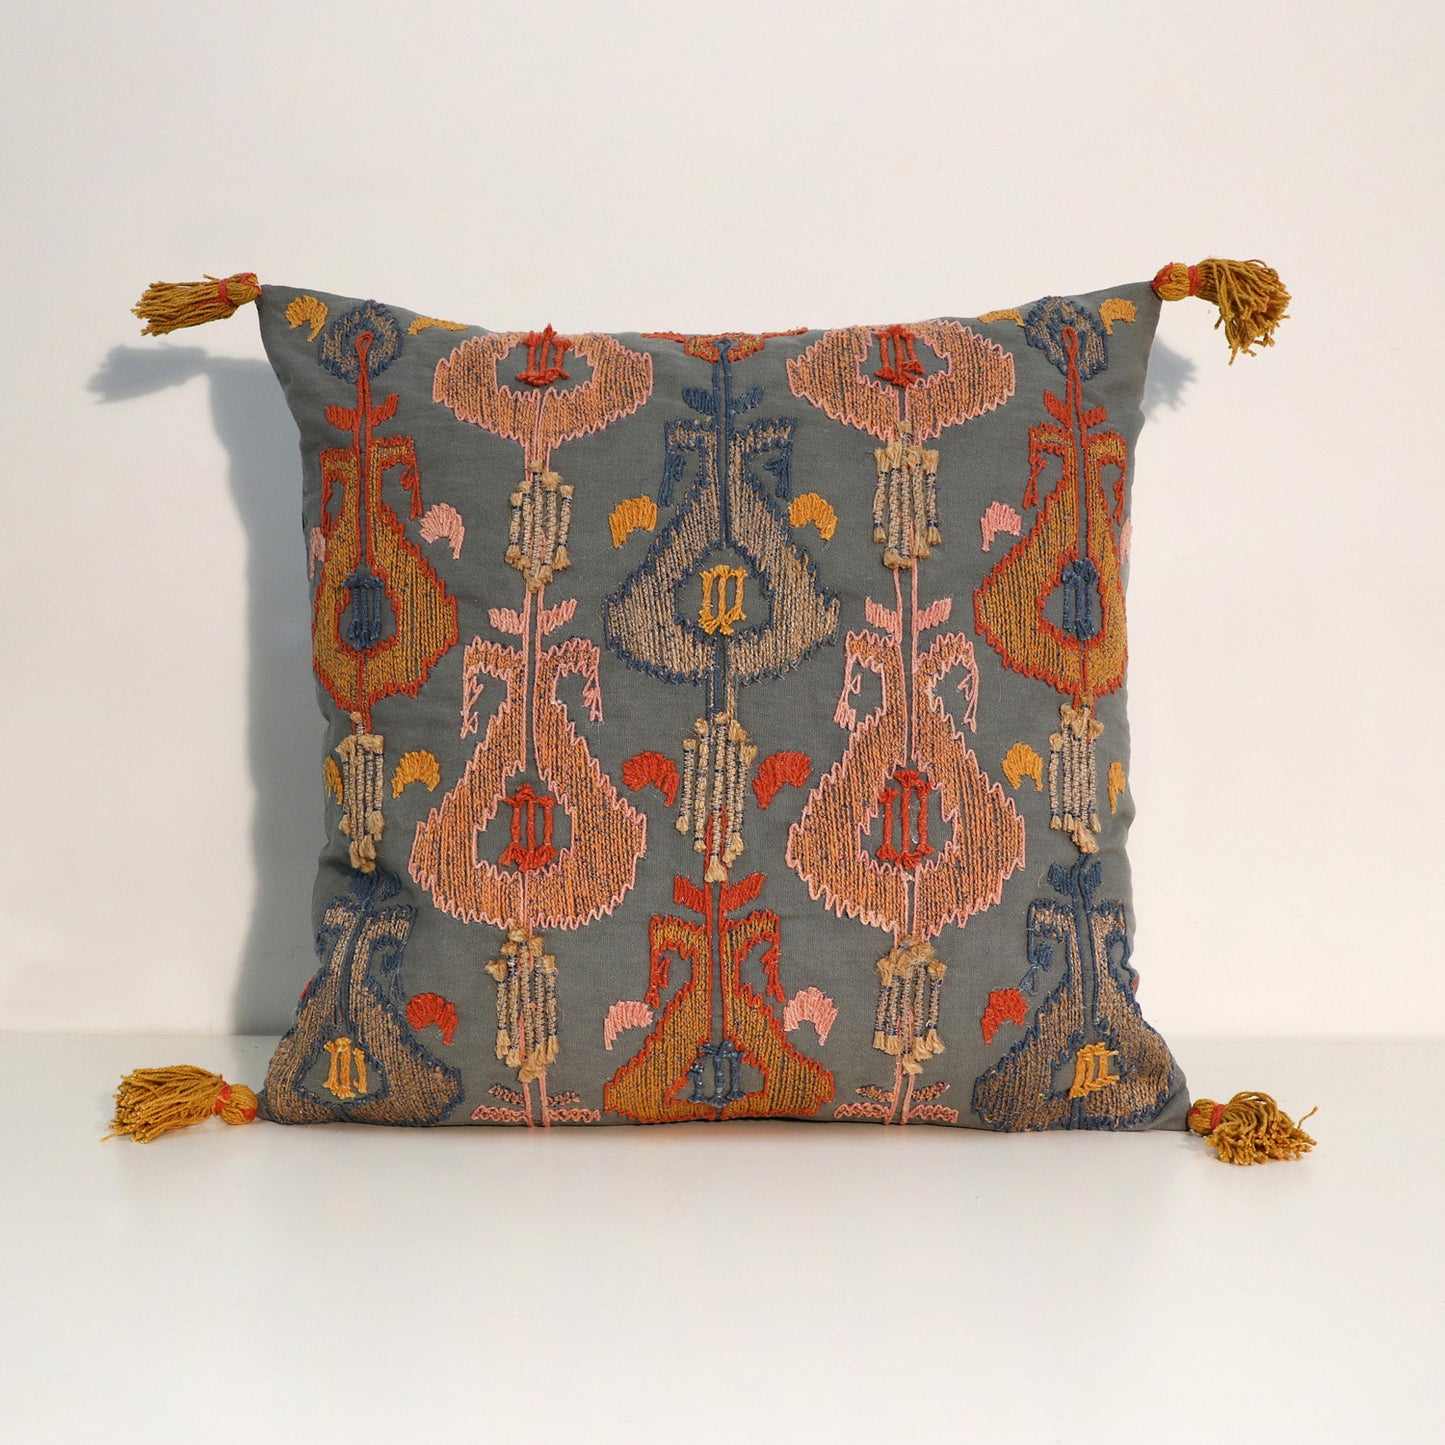 Embroidered Cushion - Ikat Design